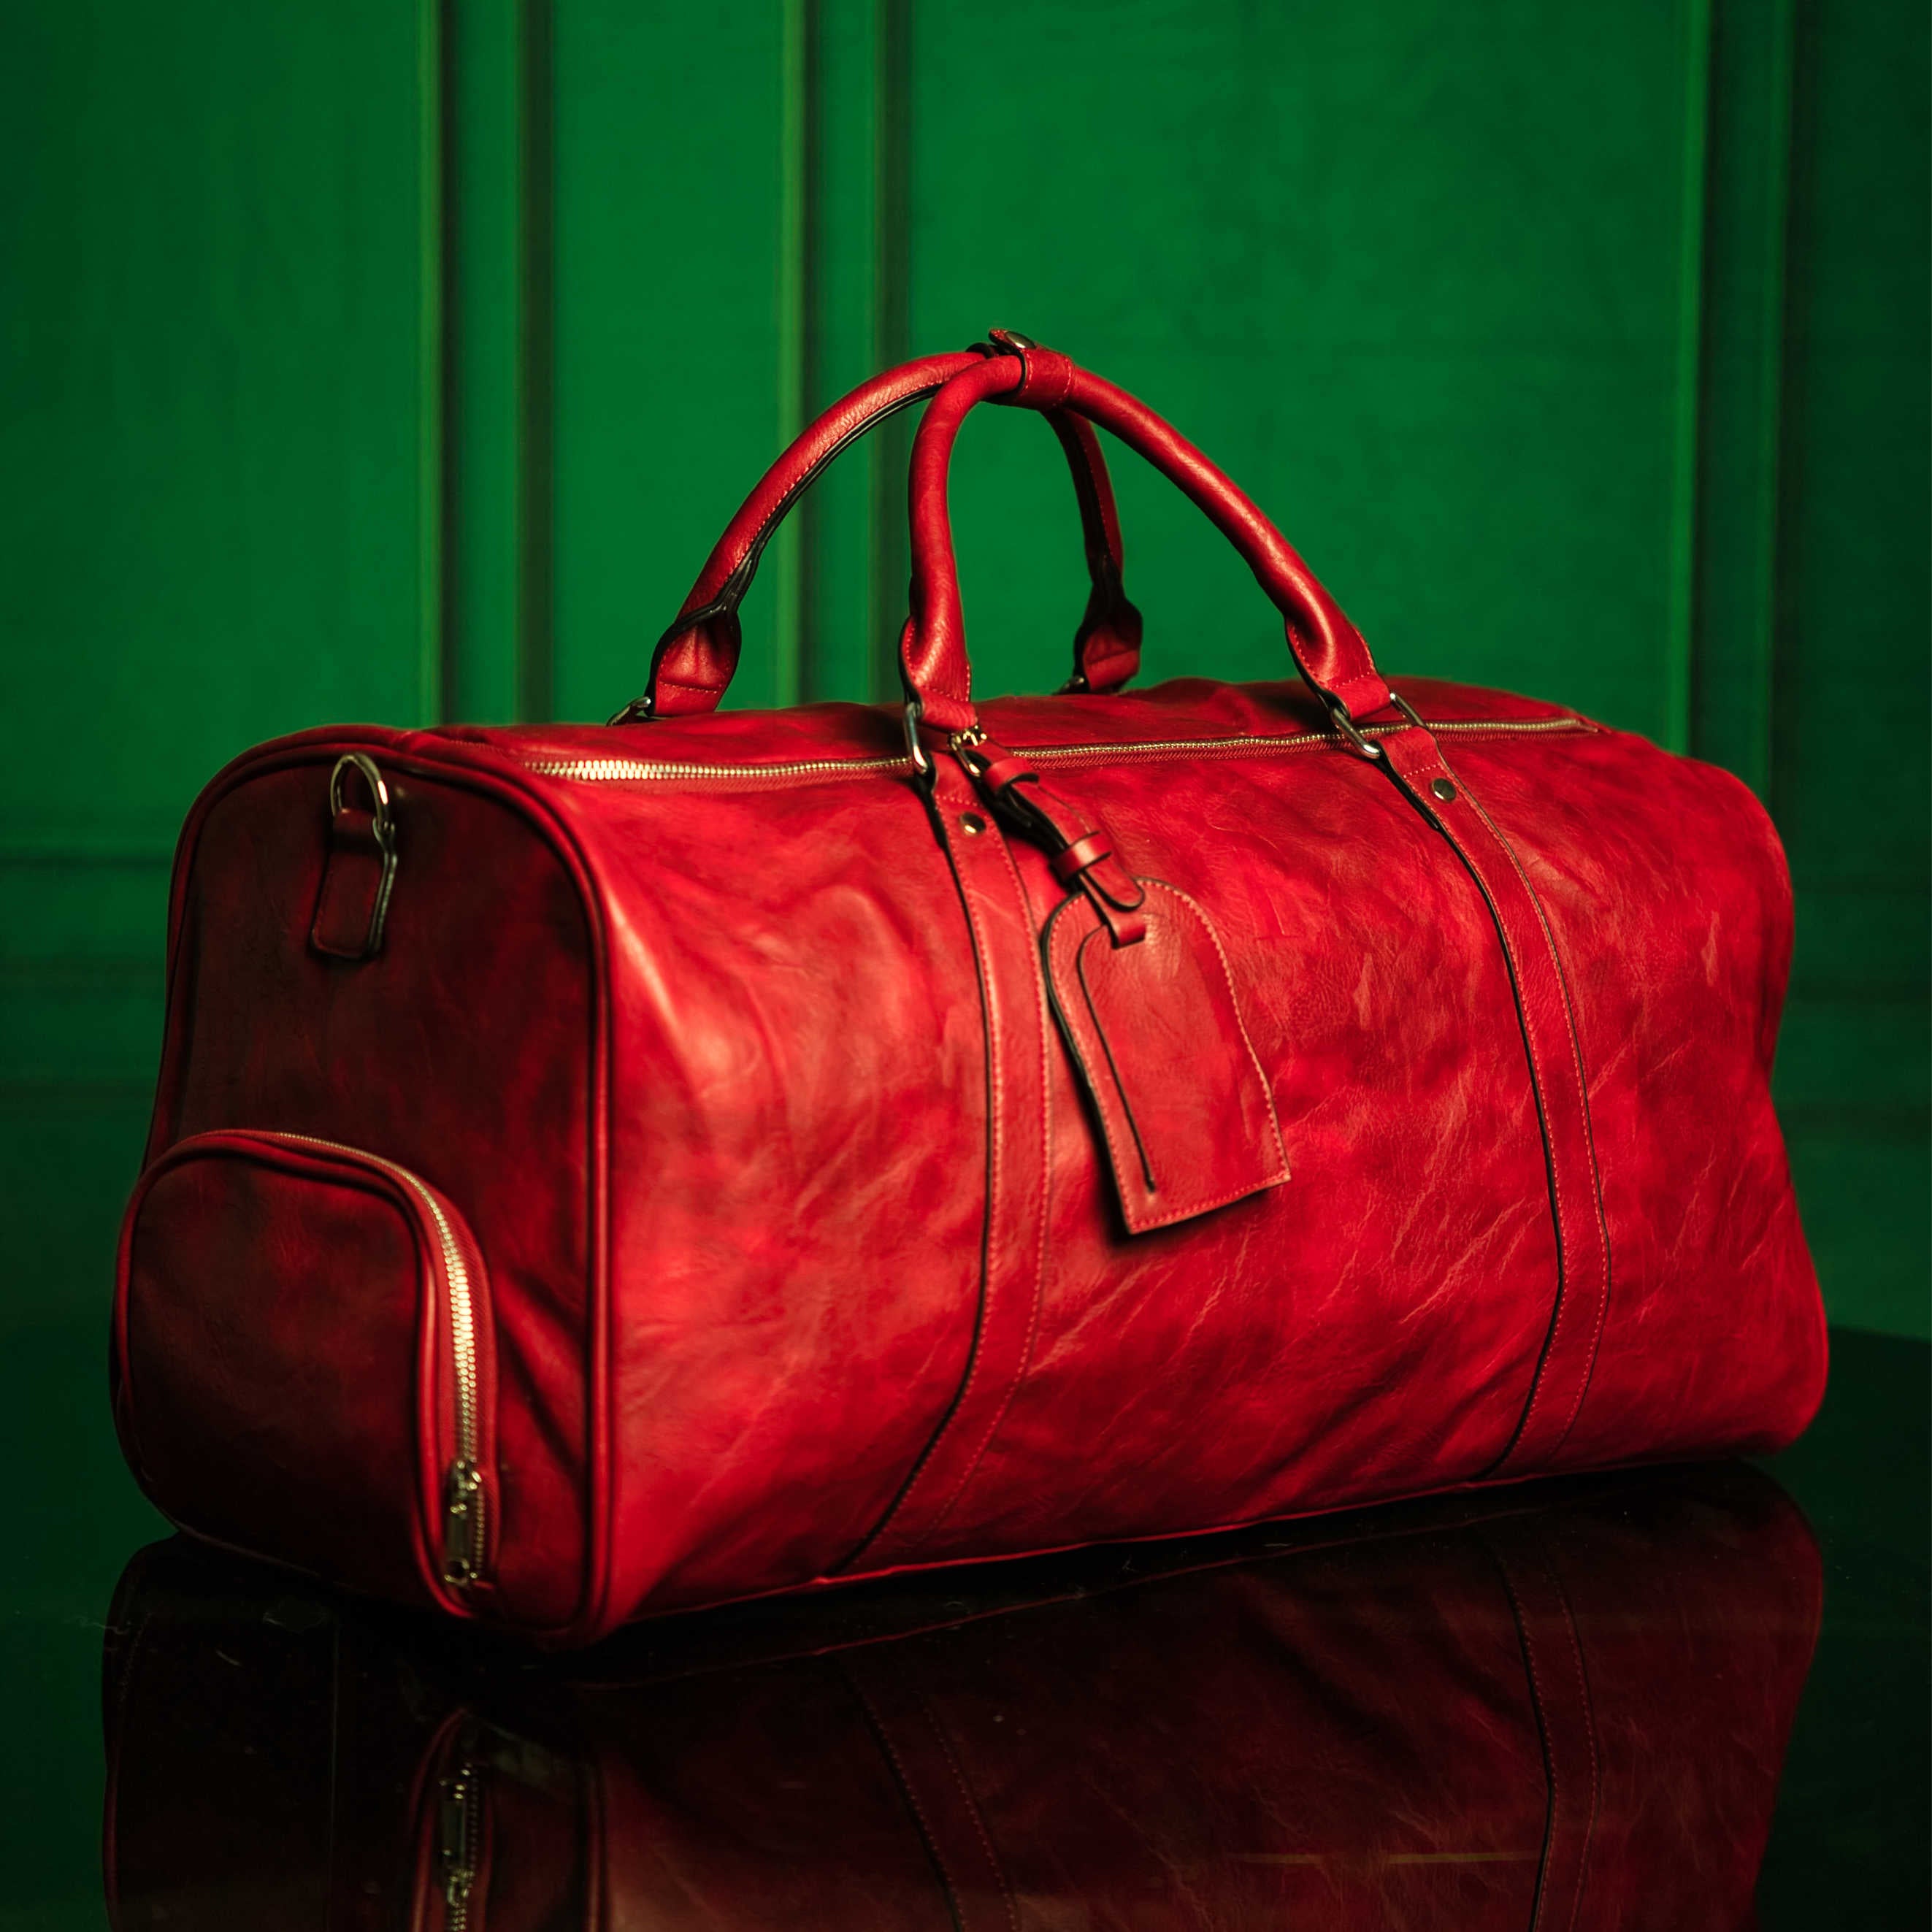 Maroon Luciano Leather Duffle Bag - Sole Premise